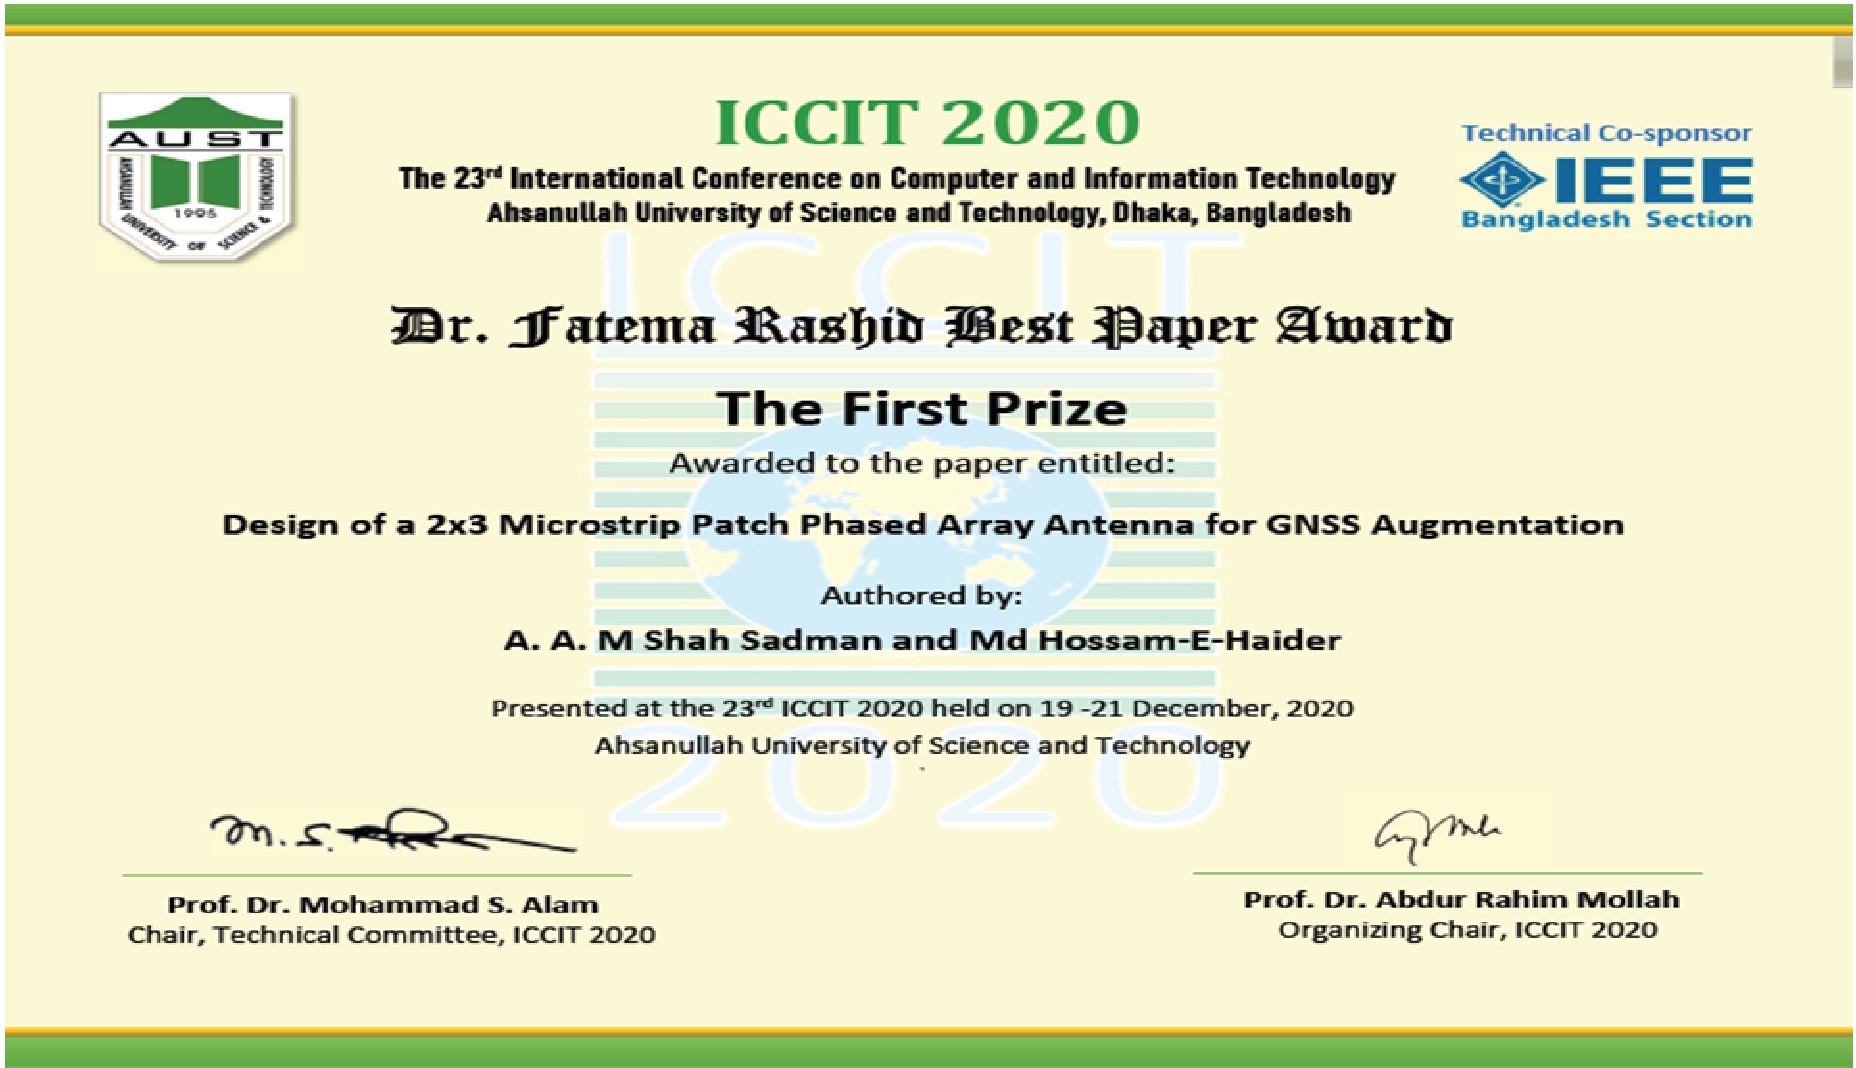 1st Prize of Dr. Fatema Rashid Best Paper Award in 23rd International Conference on Computer and Information Technology (ICCIT)